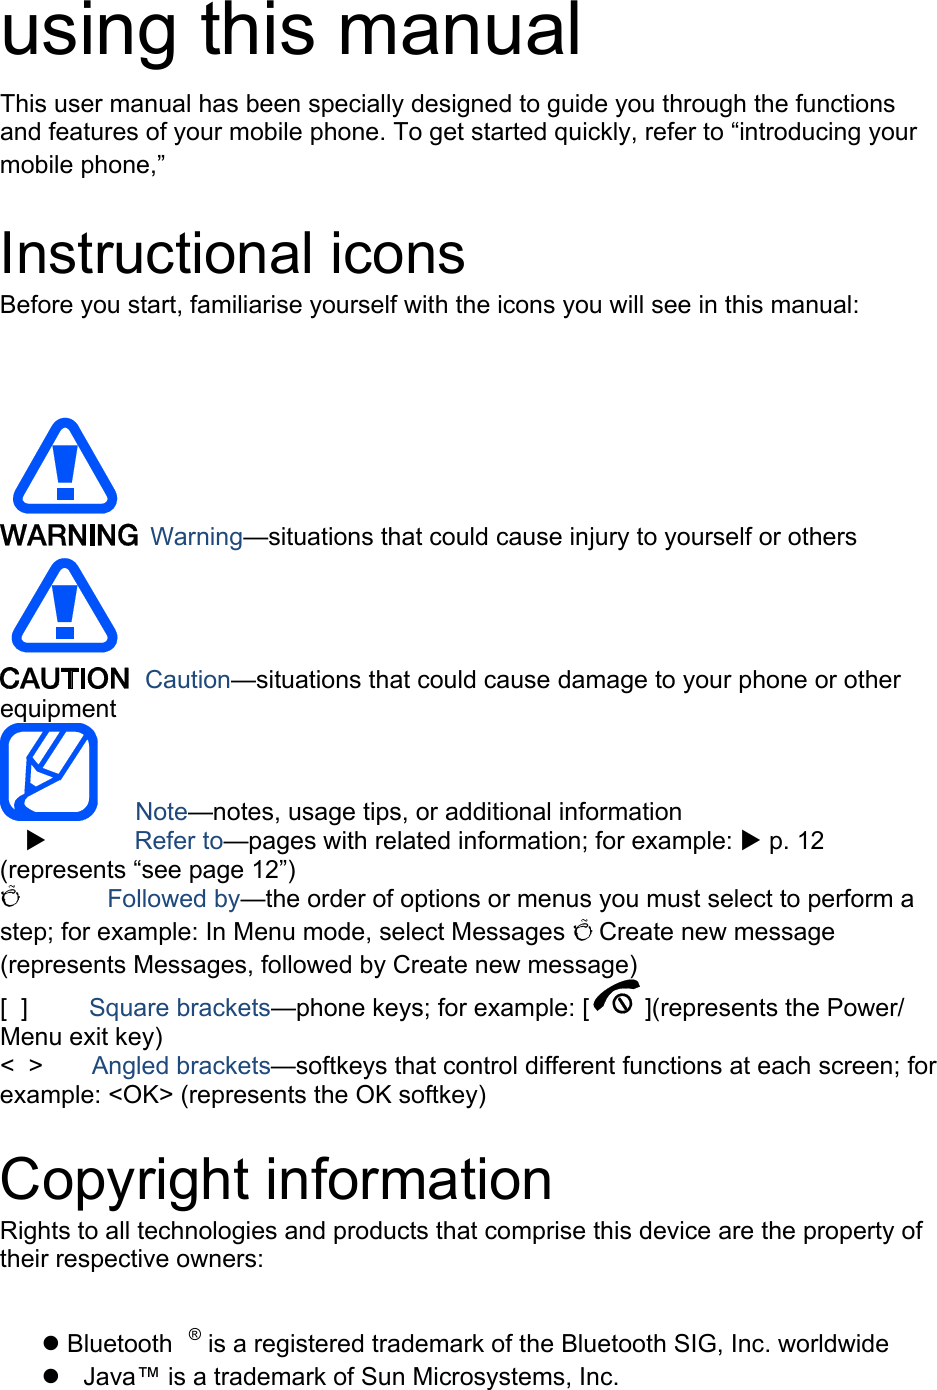 using this manual This user manual has been specially designed to guide you through the functions and features of your mobile phone. To get started quickly, refer to “introducing your mobile phone,” Instructional icons Before you start, familiarise yourself with the icons you will see in this manual:     Warning—situations that could cause injury to yourself or others  Caution—situations that could cause damage to your phone or other equipment    Note—notes, usage tips, or additional information          Refer to—pages with related information; for example:  p. 12 (represents “see page 12”) Õ       Followed by—the order of options or menus you must select to perform a step; for example: In Menu mode, select Messages Õ Create new message (represents Messages, followed by Create new message) [  ]     Square brackets—phone keys; for example: [ ](represents the Power/ Menu exit key) &lt;  &gt;    Angled brackets—softkeys that control different functions at each screen; for example: &lt;OK&gt; (represents the OK softkey)  Copyright information Rights to all technologies and products that comprise this device are the property of their respective owners:   Bluetooth ® is a registered trademark of the Bluetooth SIG, Inc. worldwide   Java™ is a trademark of Sun Microsystems, Inc. 